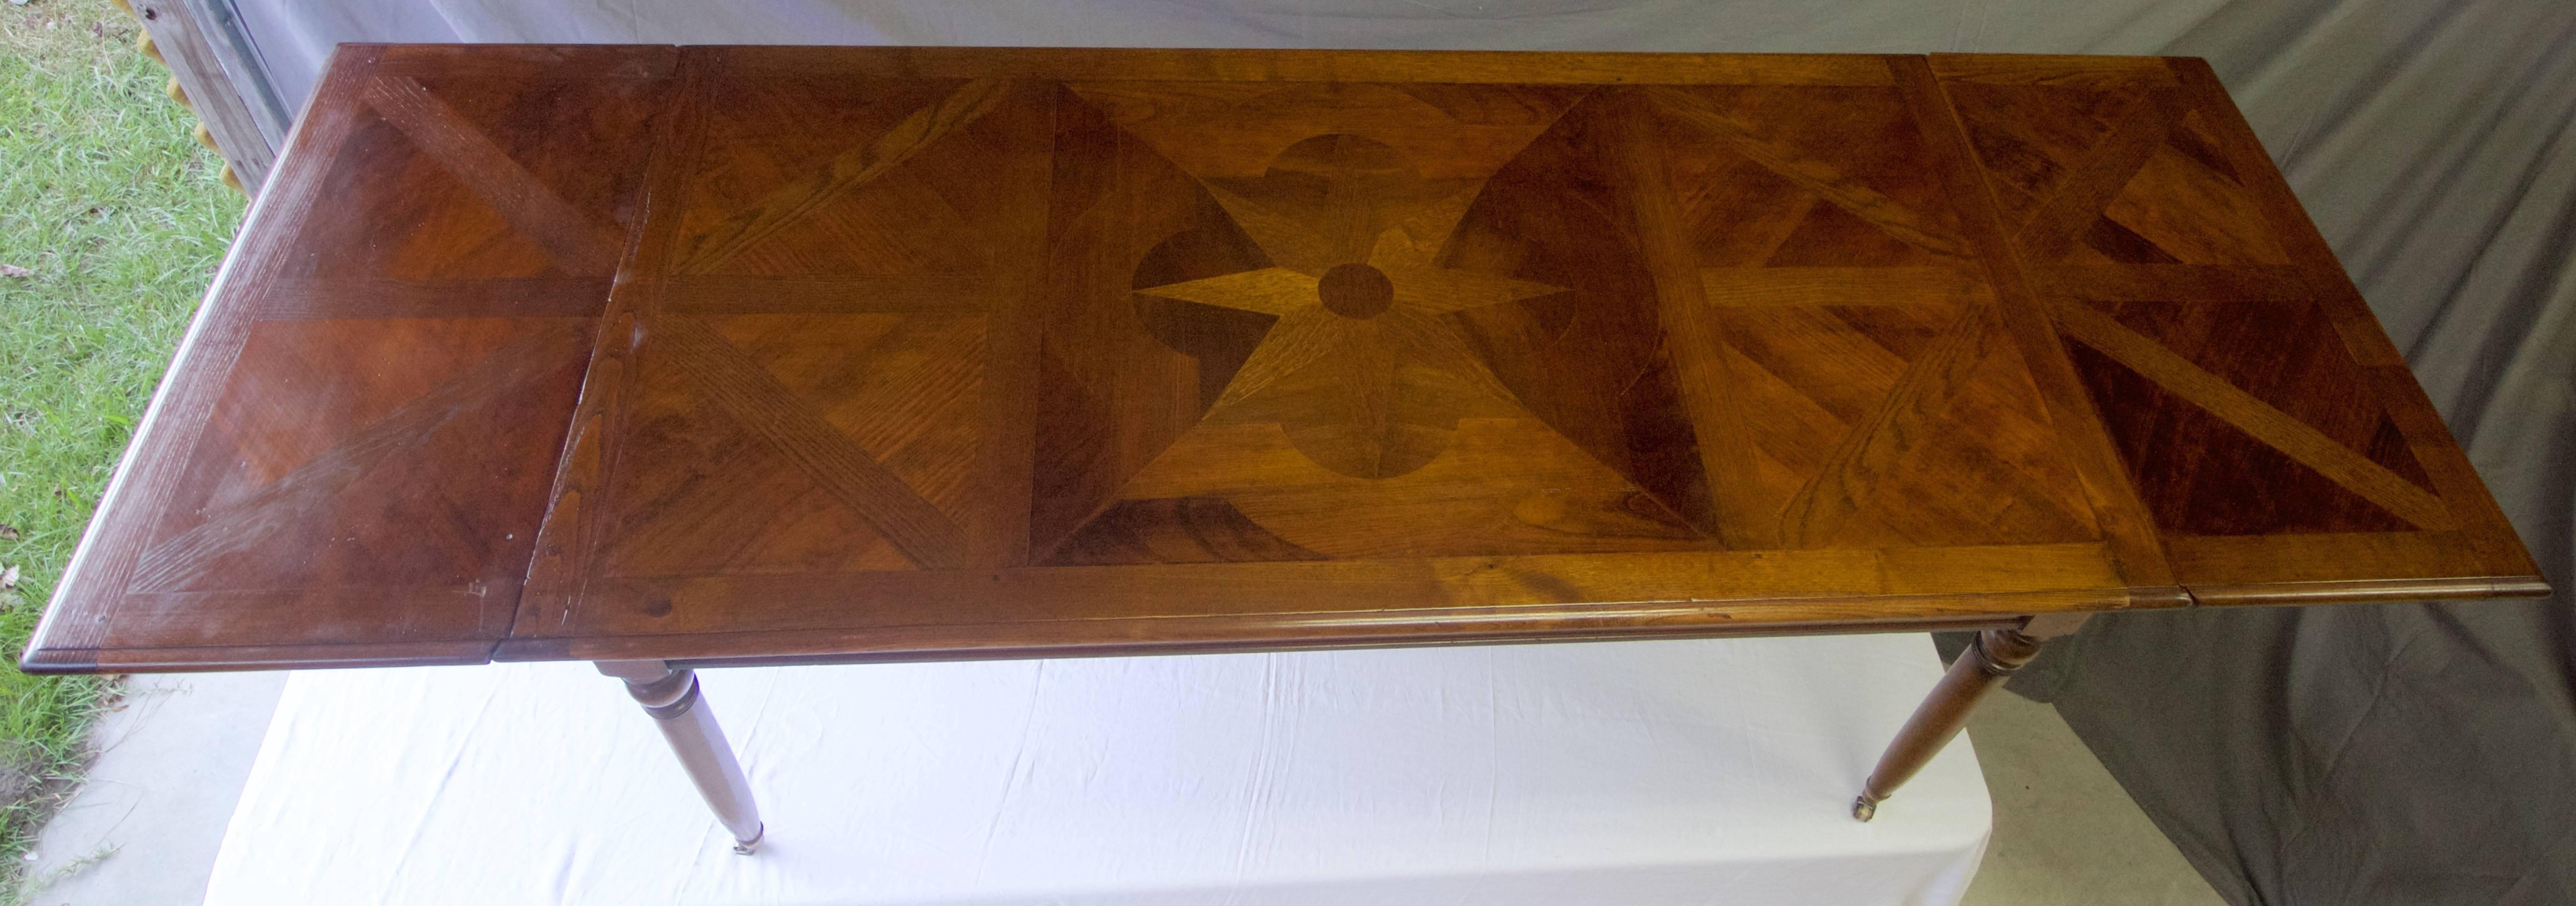 Early 20th Century Large French Wild Cherry Parquetry Top Dining Table For Sale 4